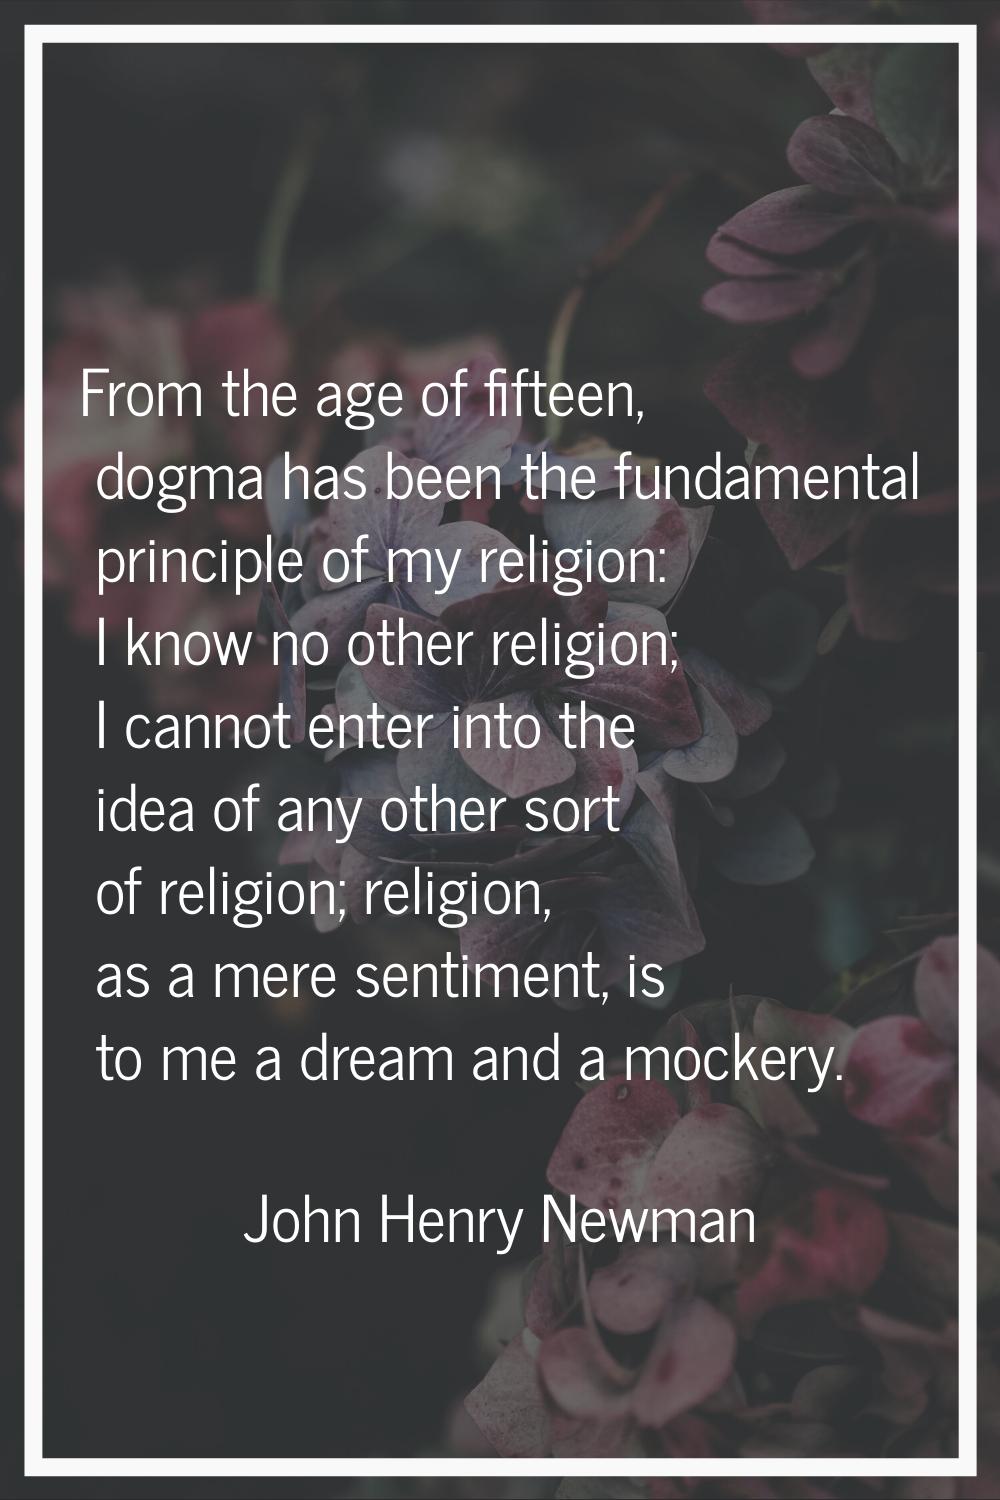 From the age of fifteen, dogma has been the fundamental principle of my religion: I know no other r